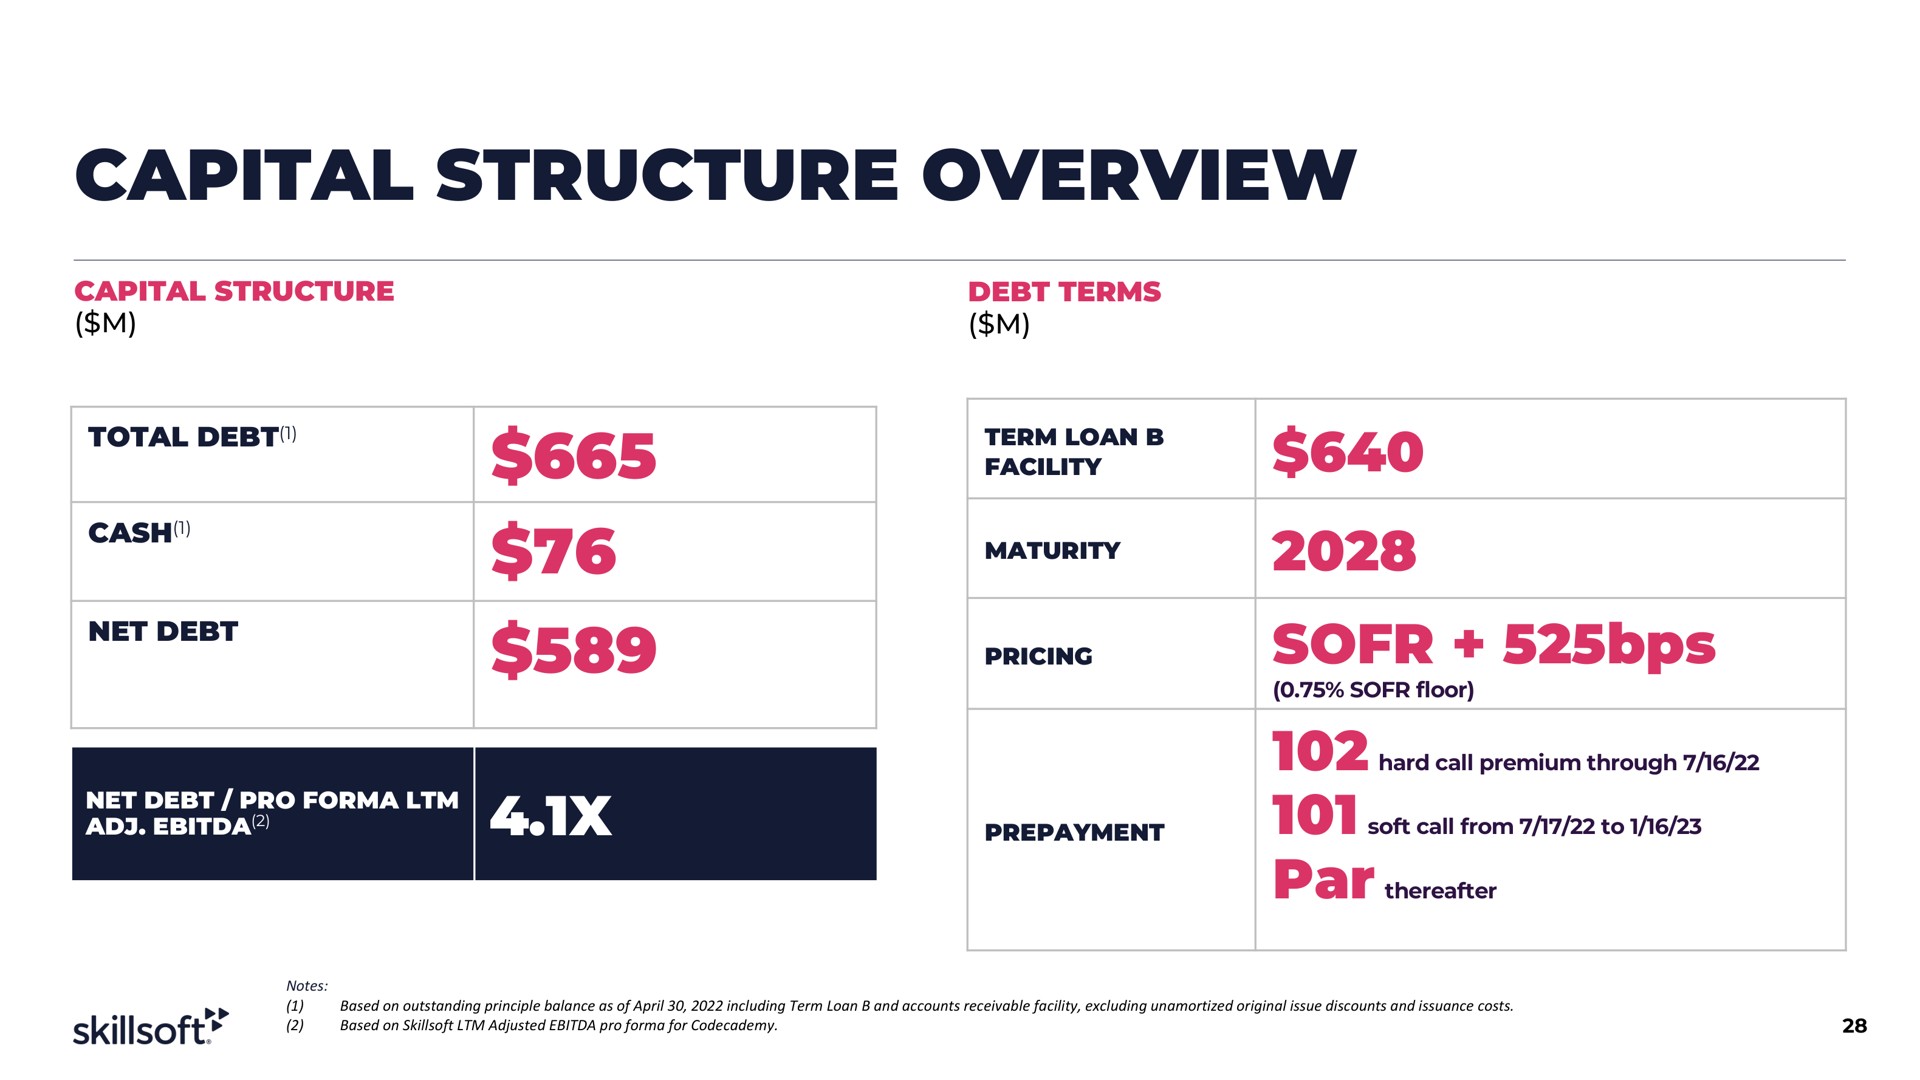 capital structure overview total debt | Skillsoft